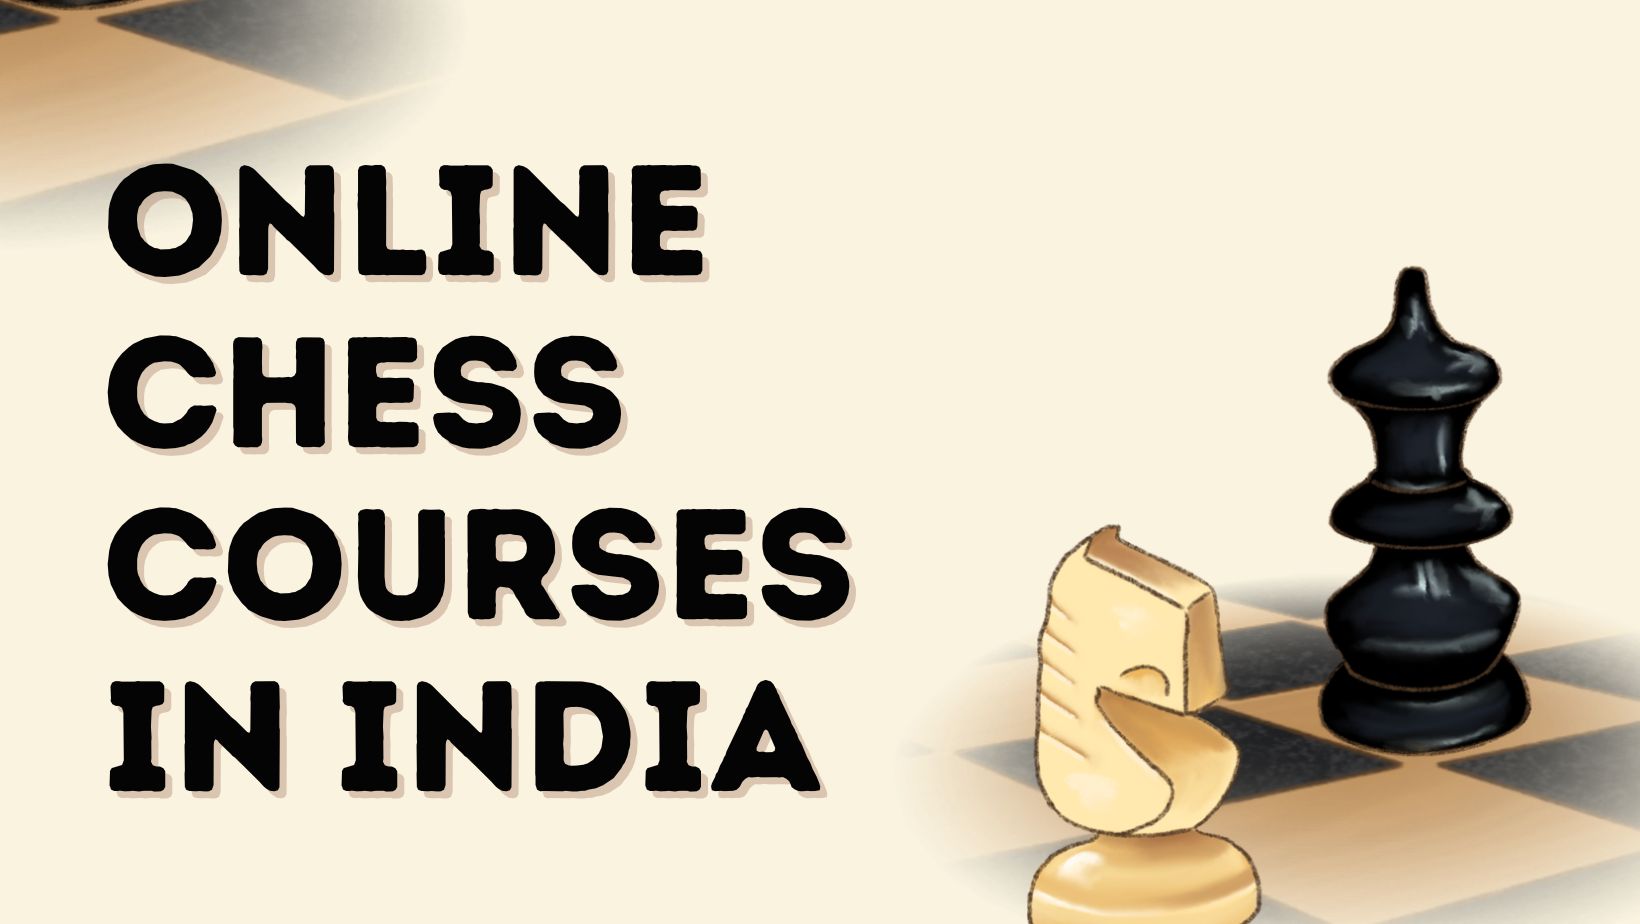 Online Chess Courses in India